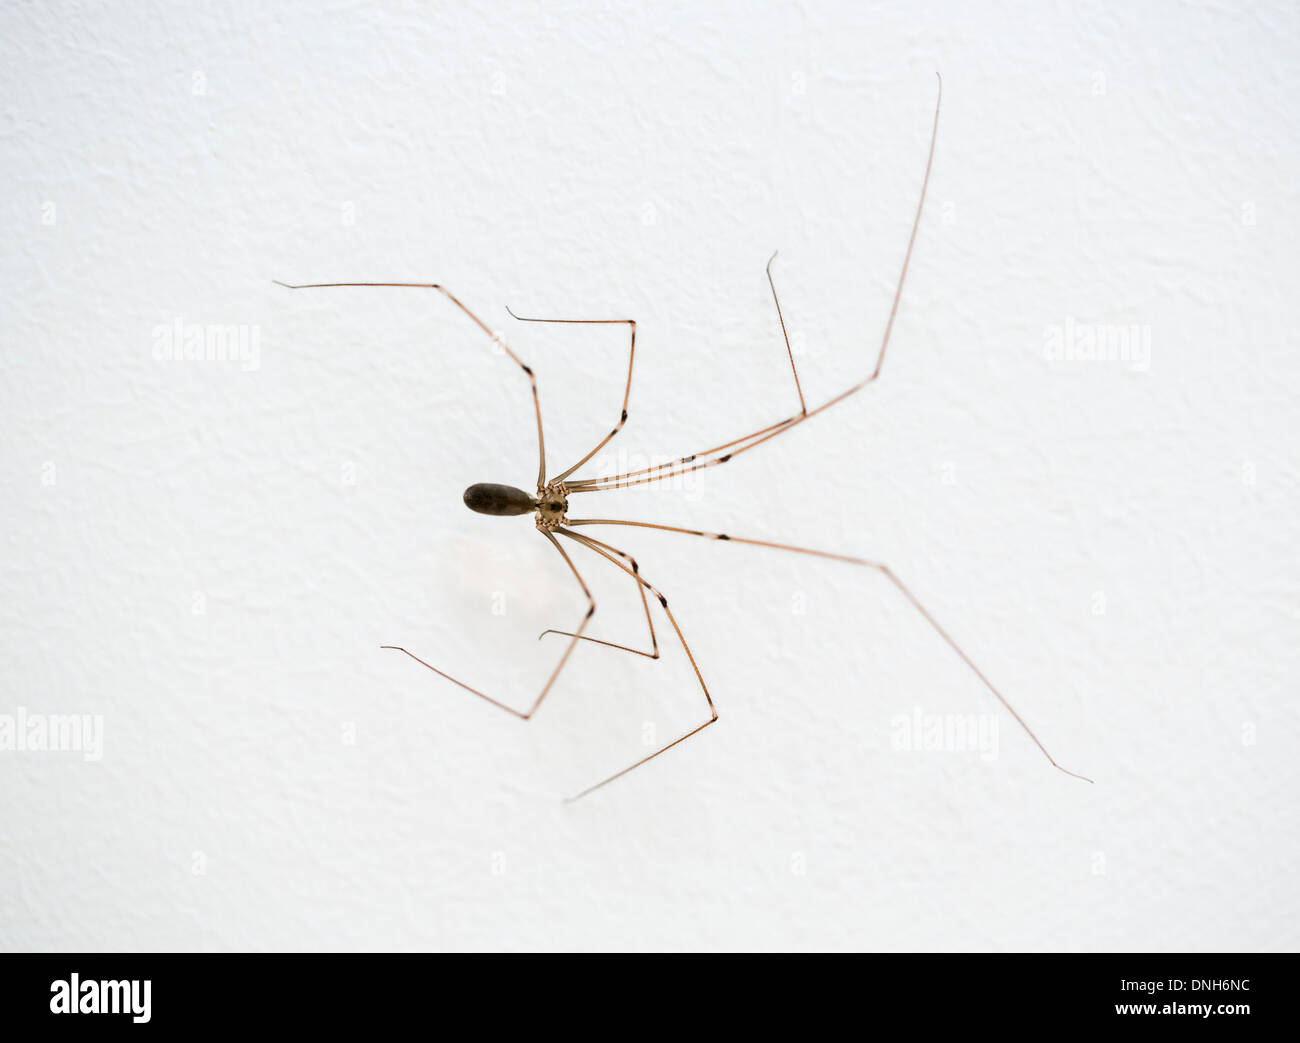 Pholcus phalangioides, a common household spider known as the cellar spider or daddy long-legs, close up Stock Photo